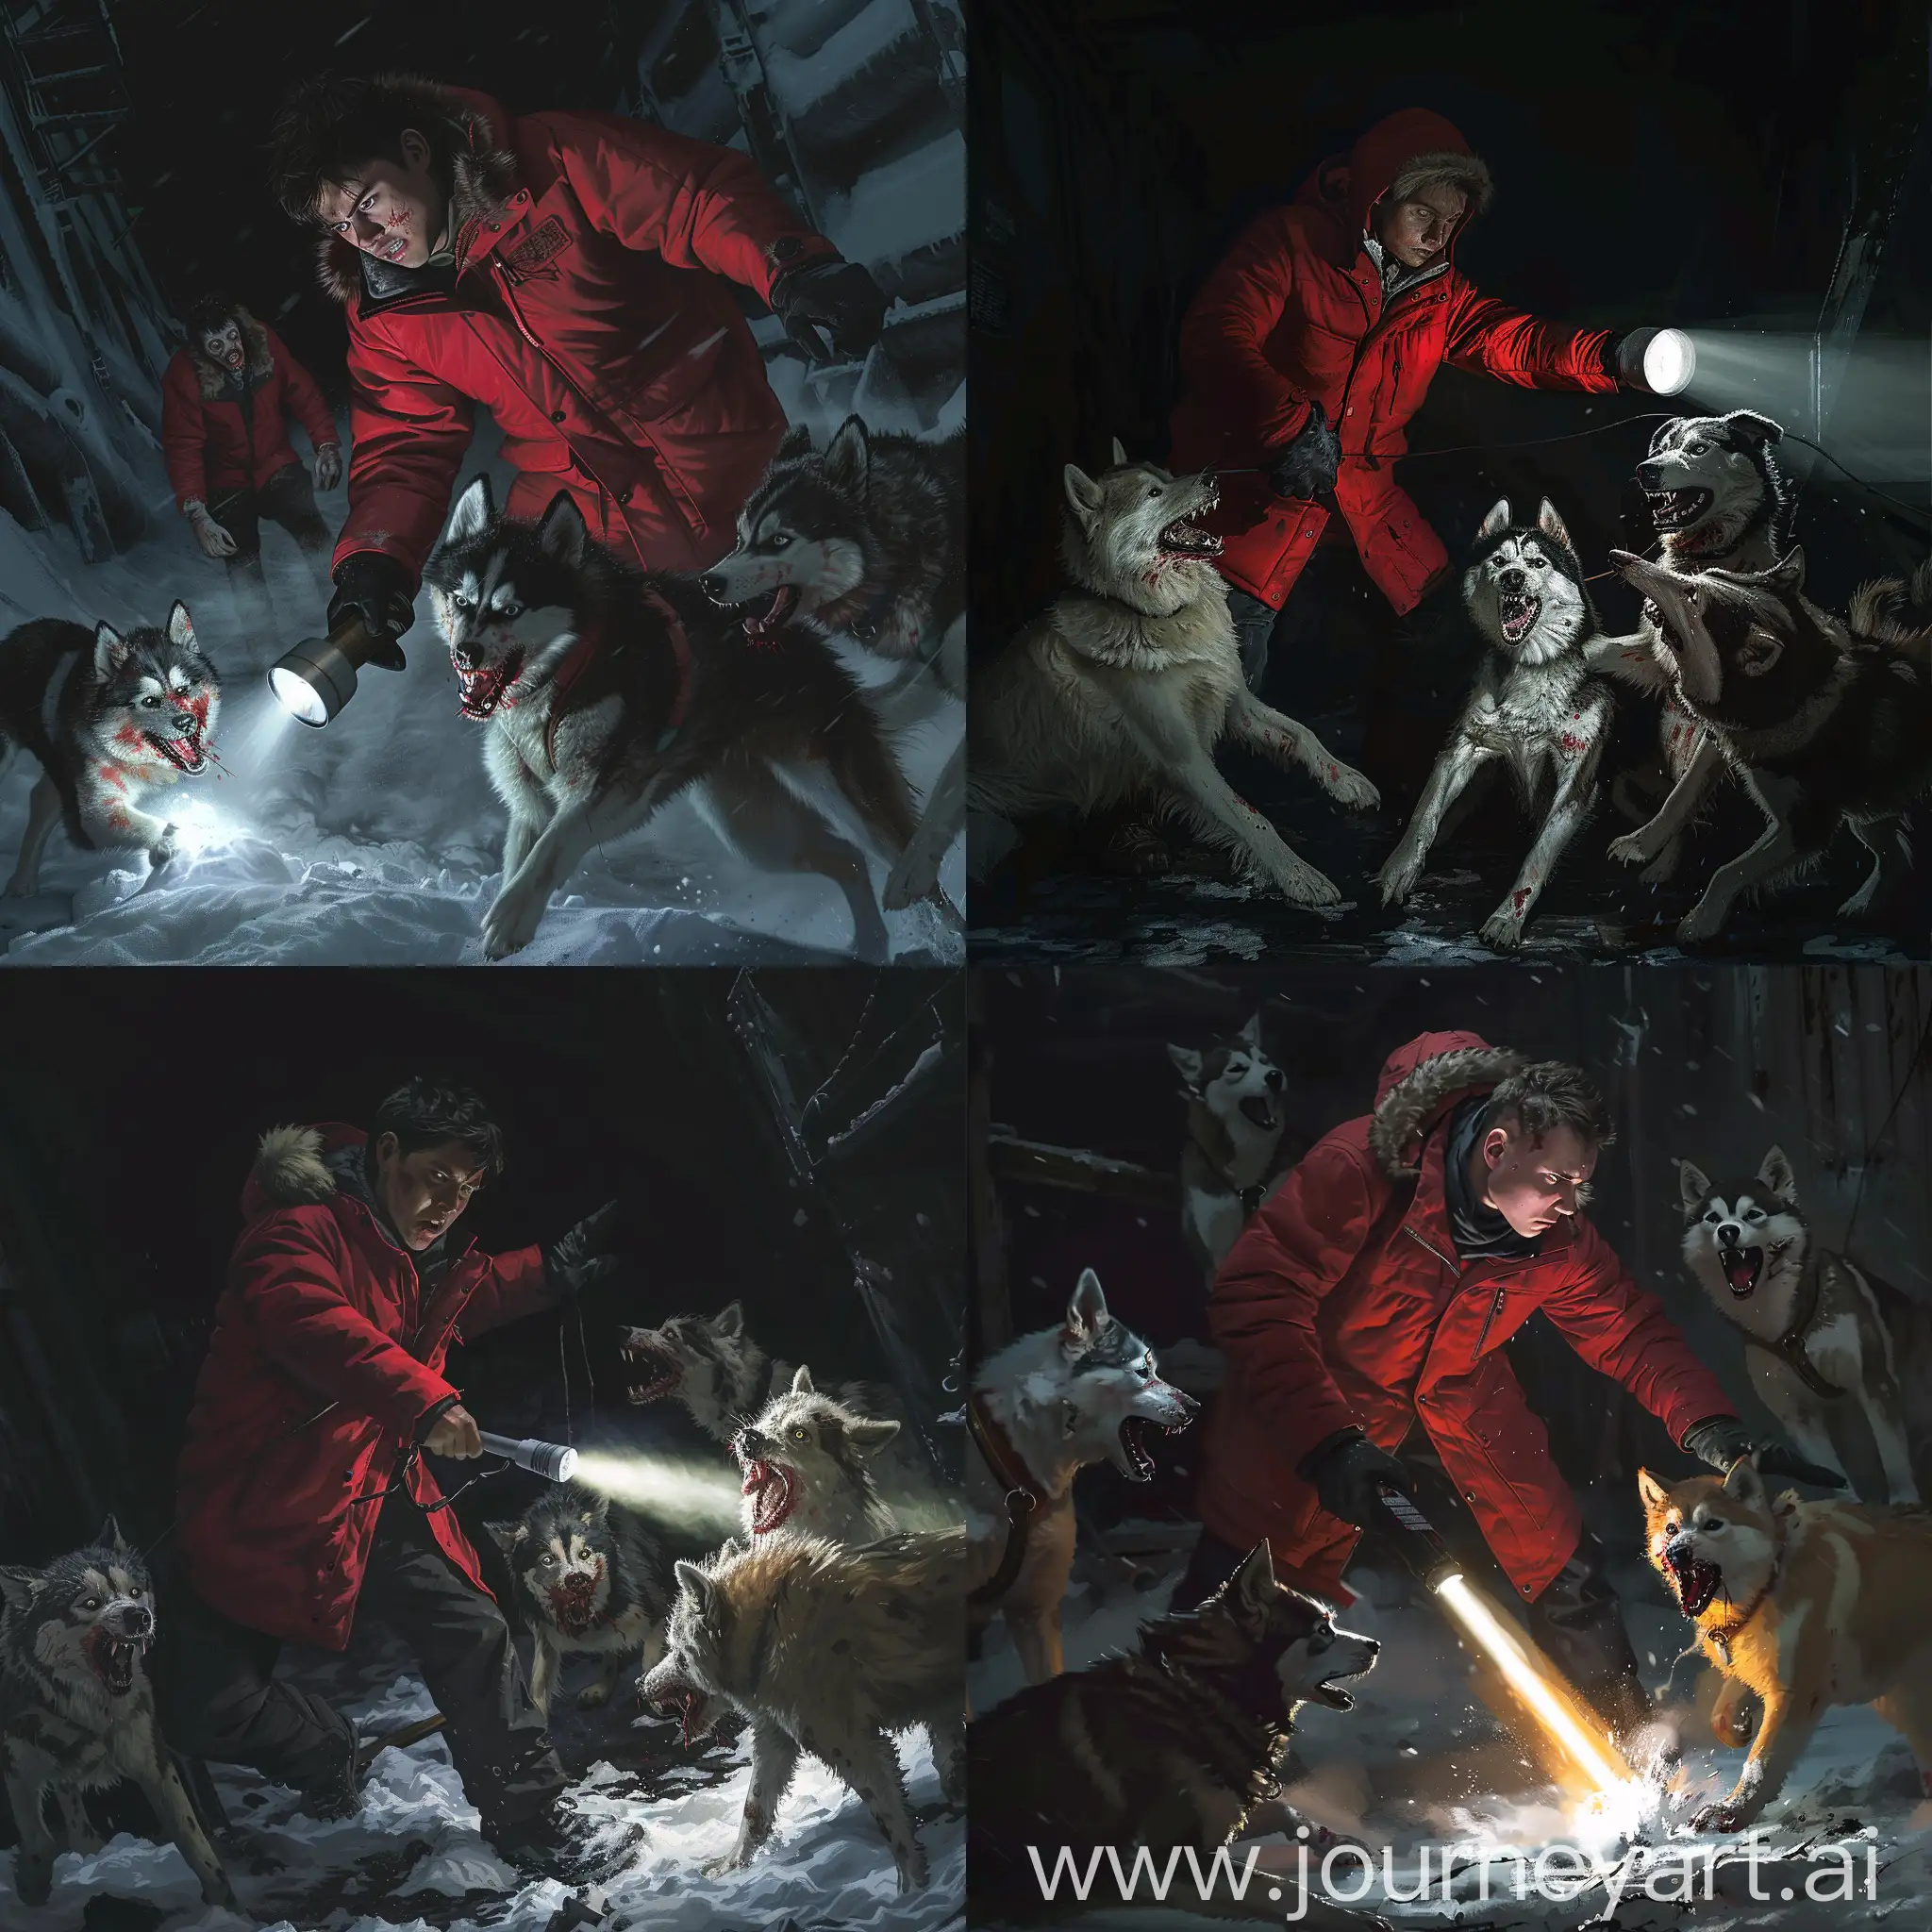 Young-Man-in-Red-Parka-Defending-Against-Infected-Zombie-Husky-Dogs-in-Abandoned-Mine